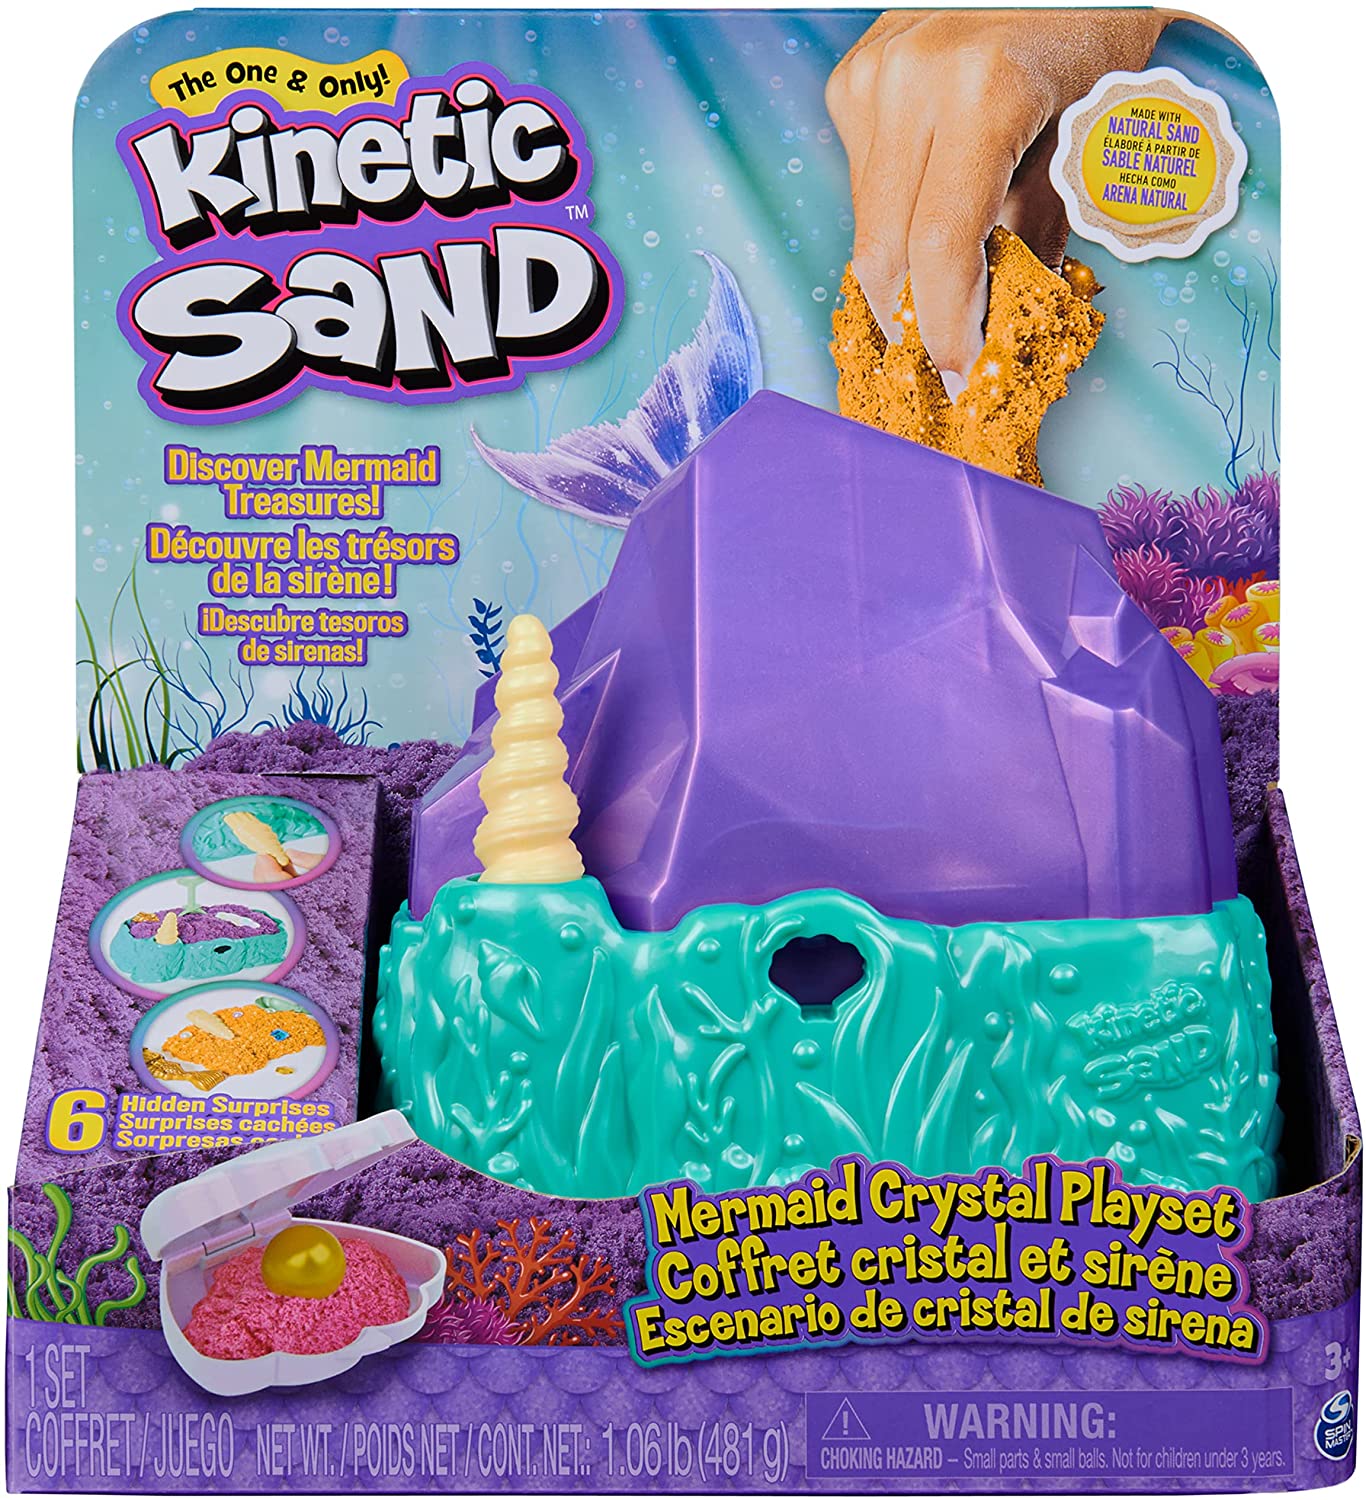 Coolsand 5 lb. Refill Bucket with Inflatable Sandbox Kinetic Play Sand for All Ages (Blue)